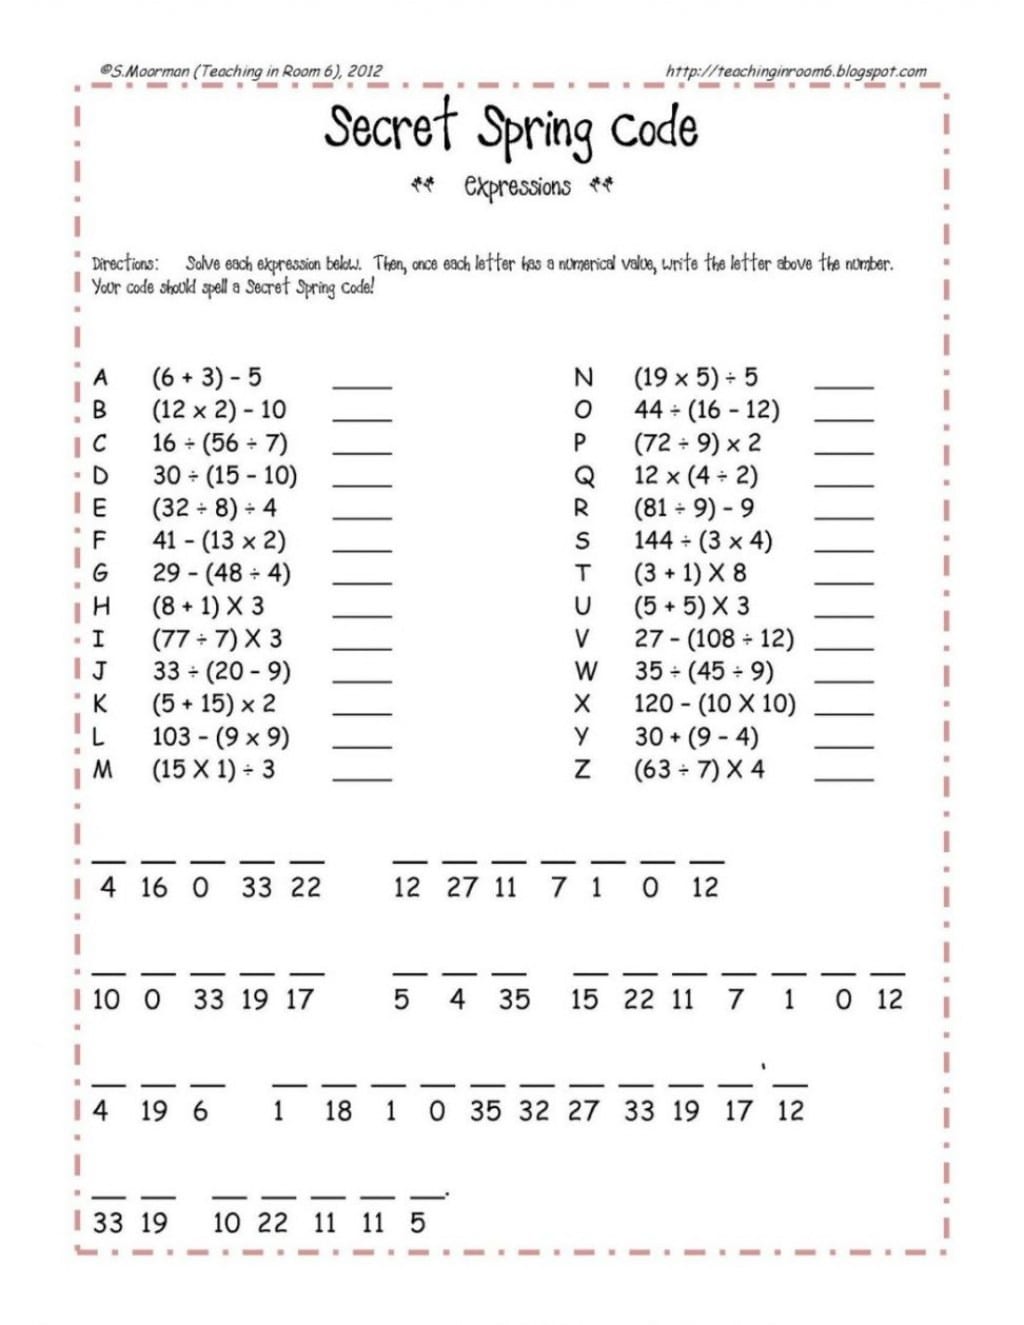 Fun Worksheets For Middle School db excel com